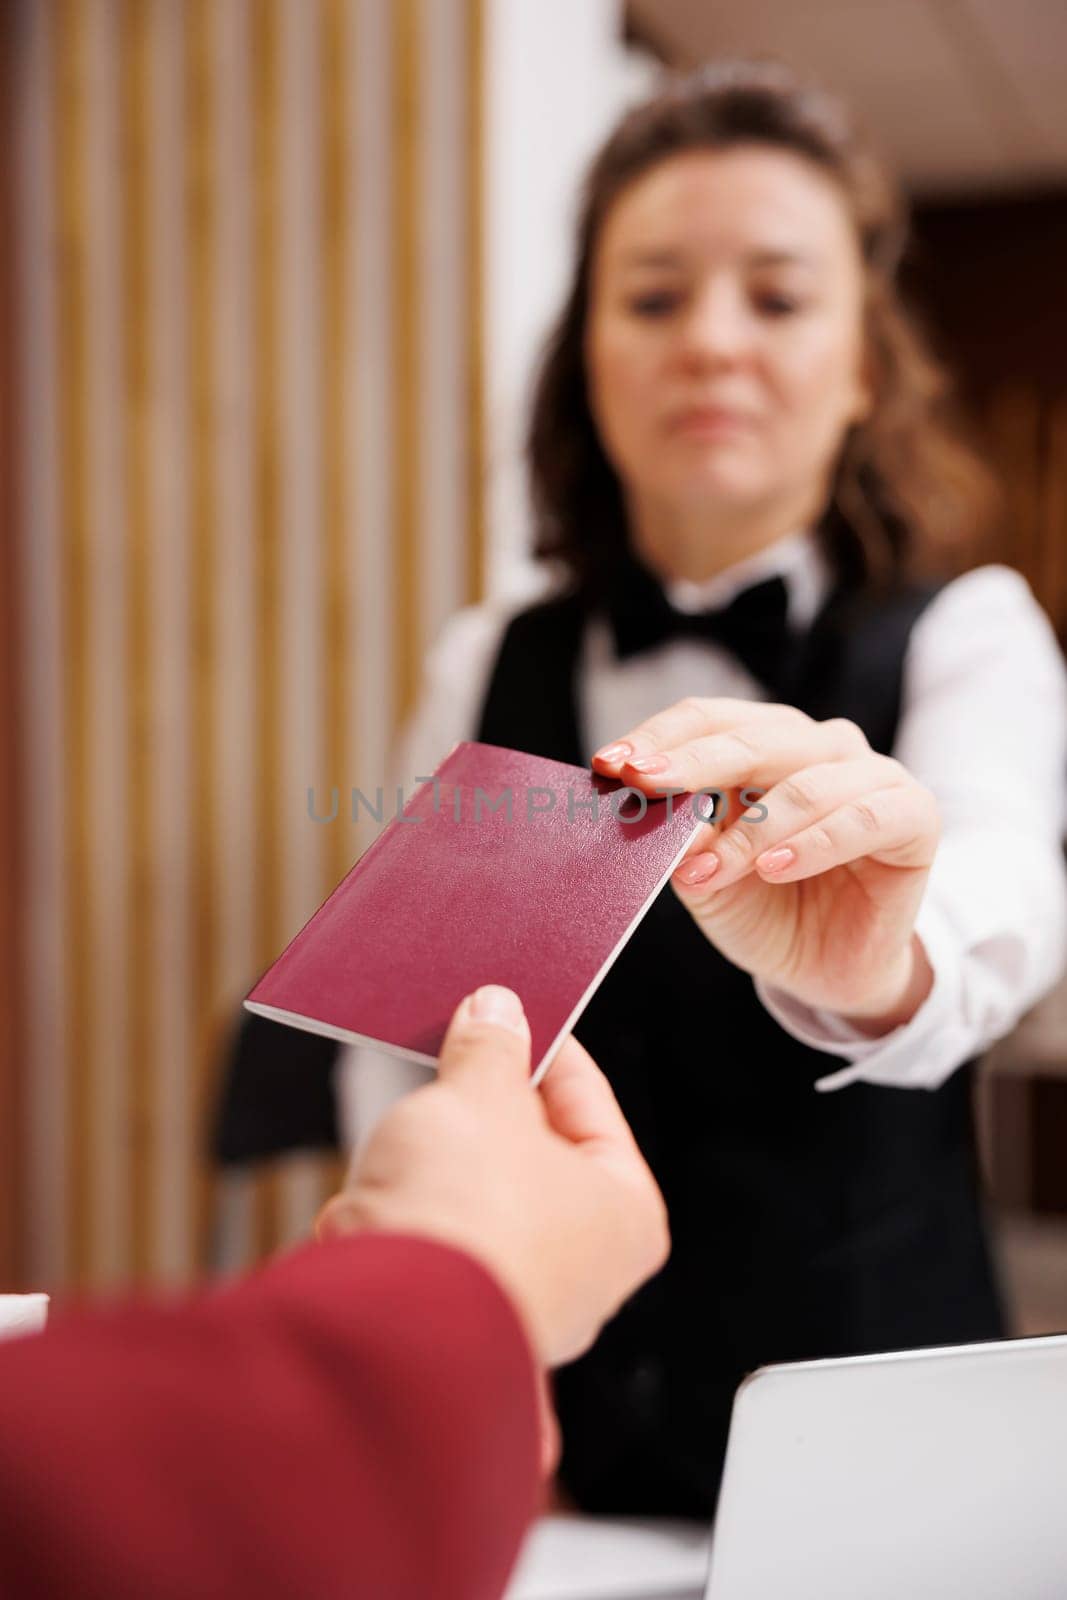 Hotel concierge checks passport, taking identification files from guest to fill in papers and help him settle in. Businessman in suit travelling for corporate work trip. Close up.